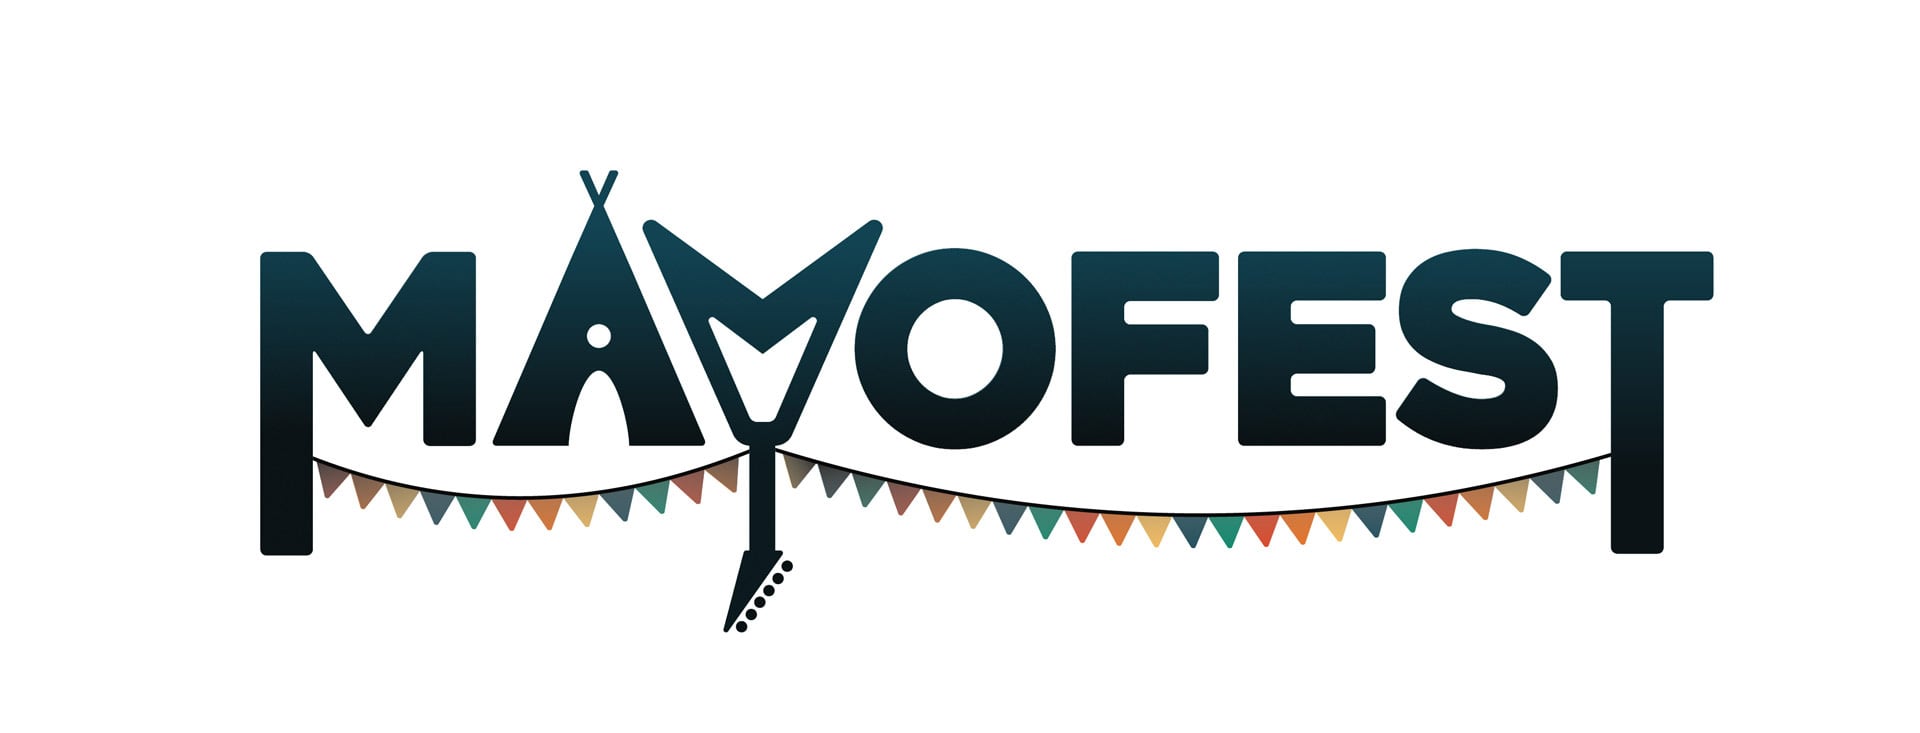 full colour mayofest logo shows the capital a as a tent and the captial y as an upside down guitar. penant banners drape between the words.